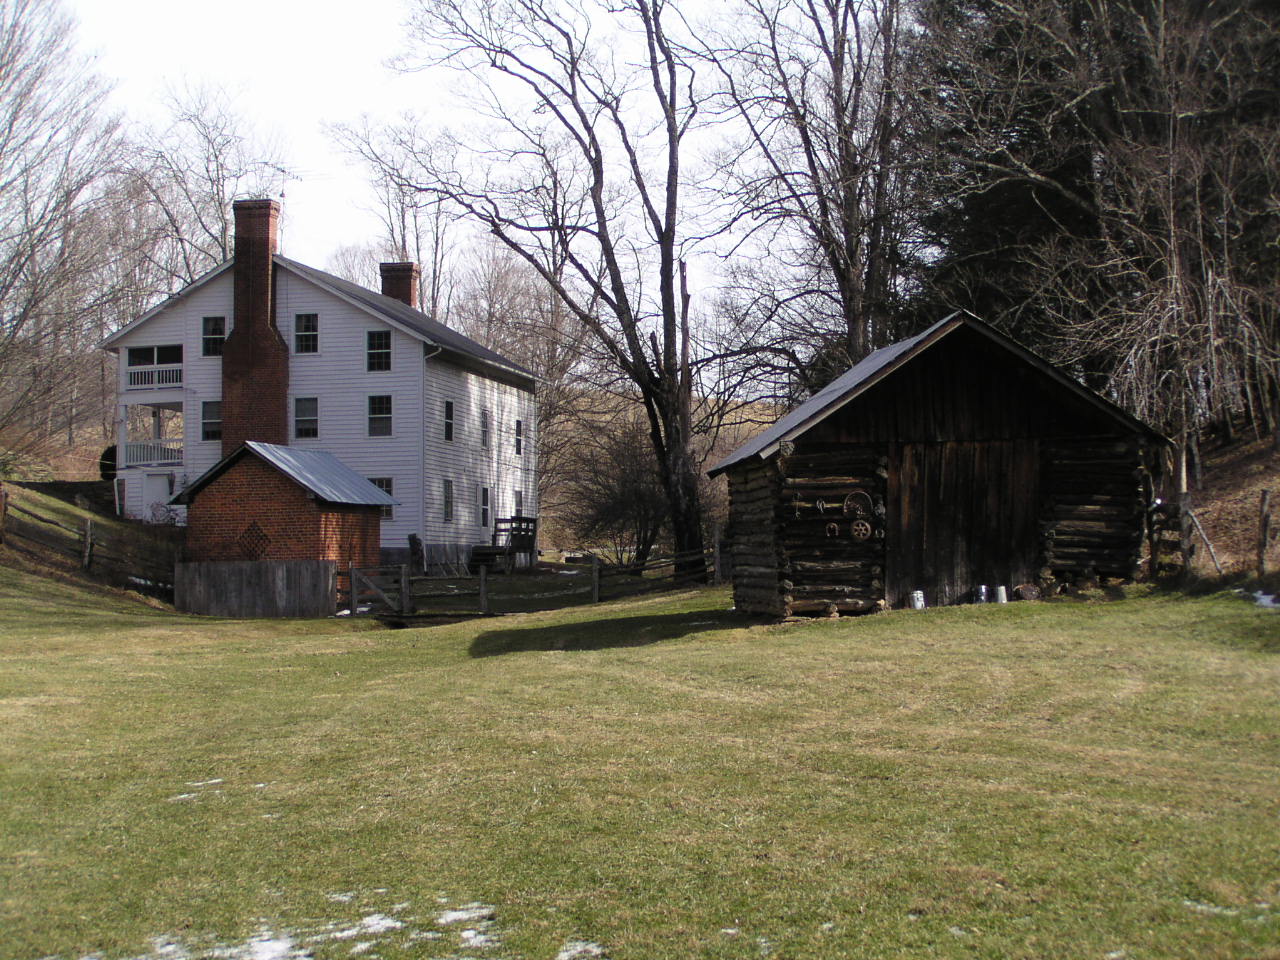 Main House and Outbuildings. Photo credit: Mike Pulice/DHR, 2005